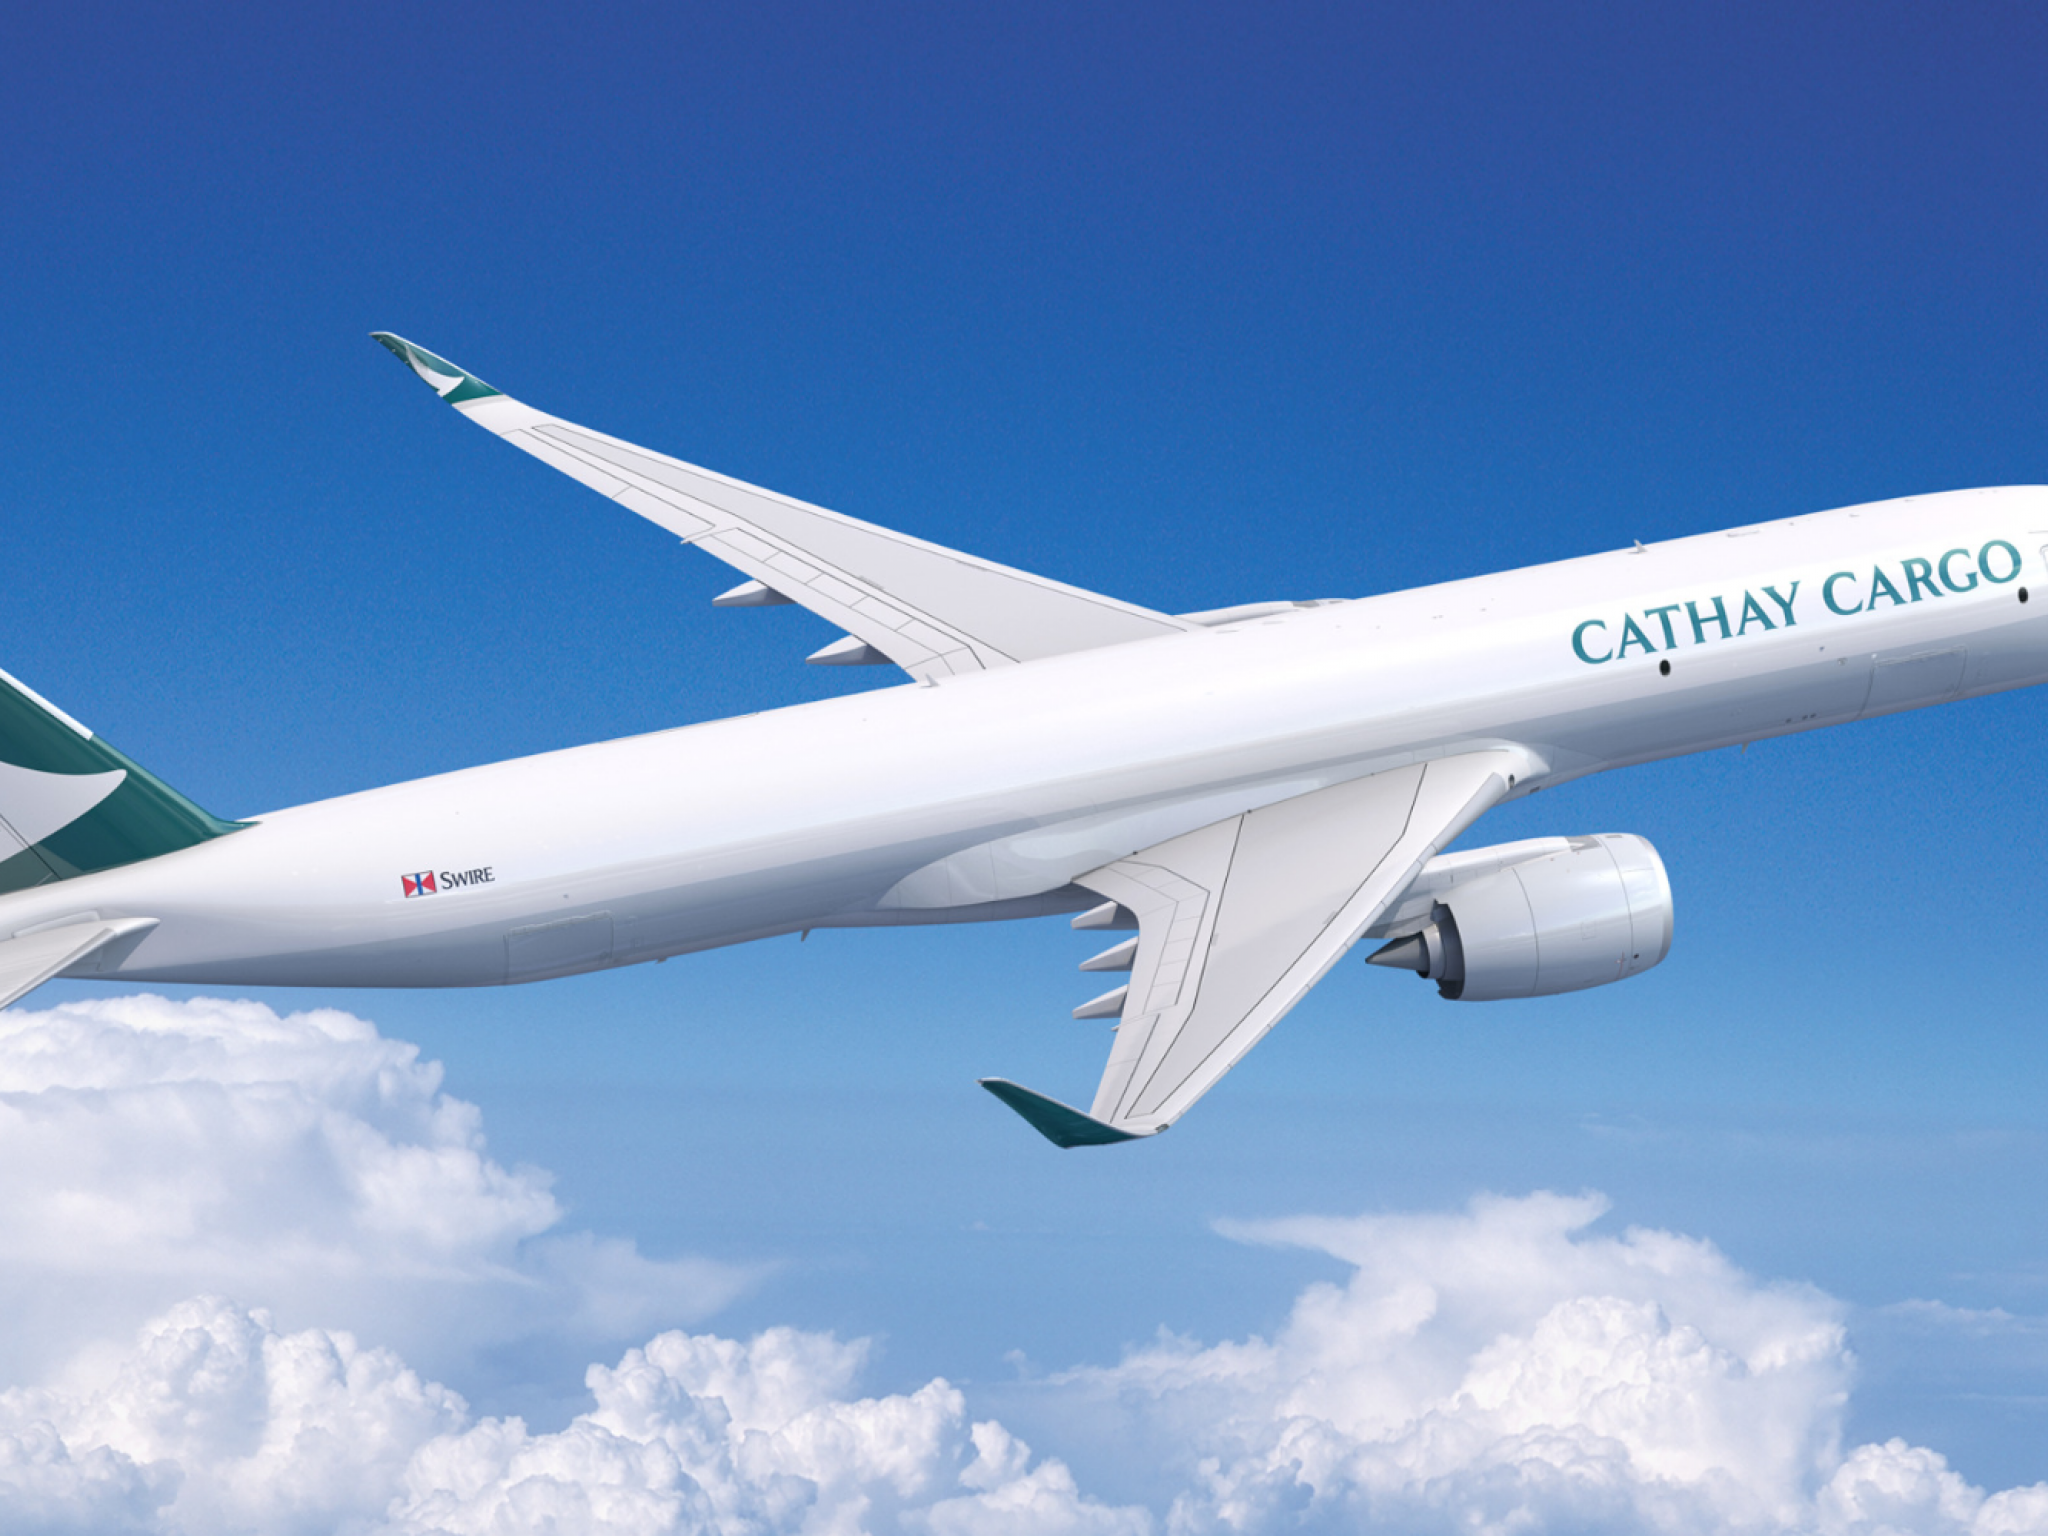  cathay-pacific-embarks-on-billion-dollar-airbus-deal-for-freighters 